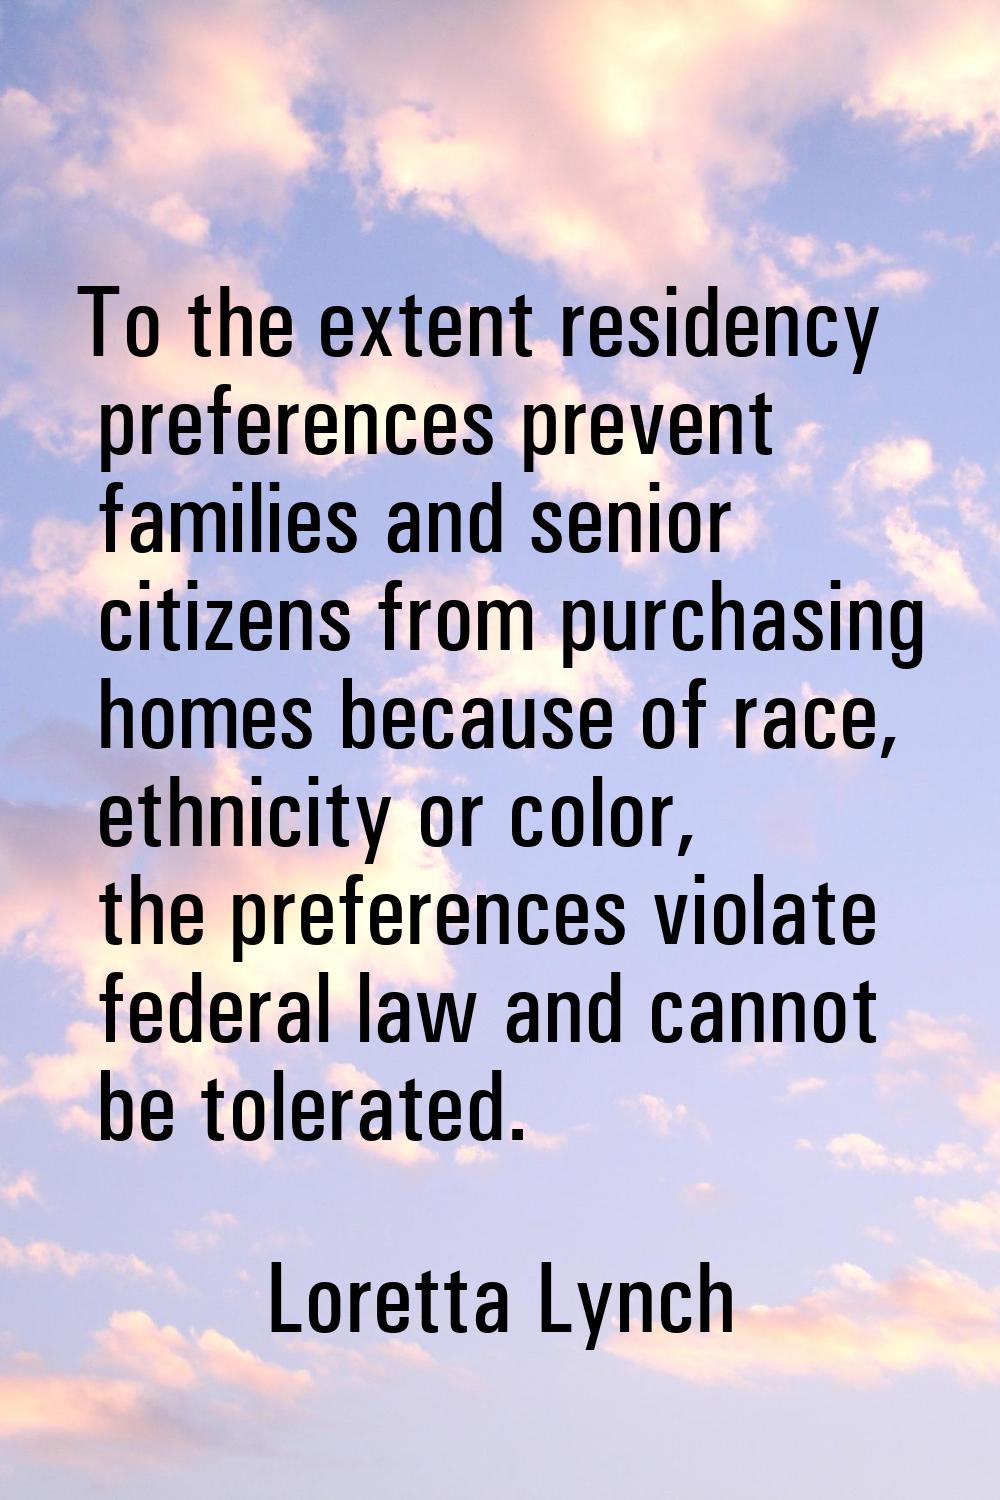 To the extent residency preferences prevent families and senior citizens from purchasing homes beca